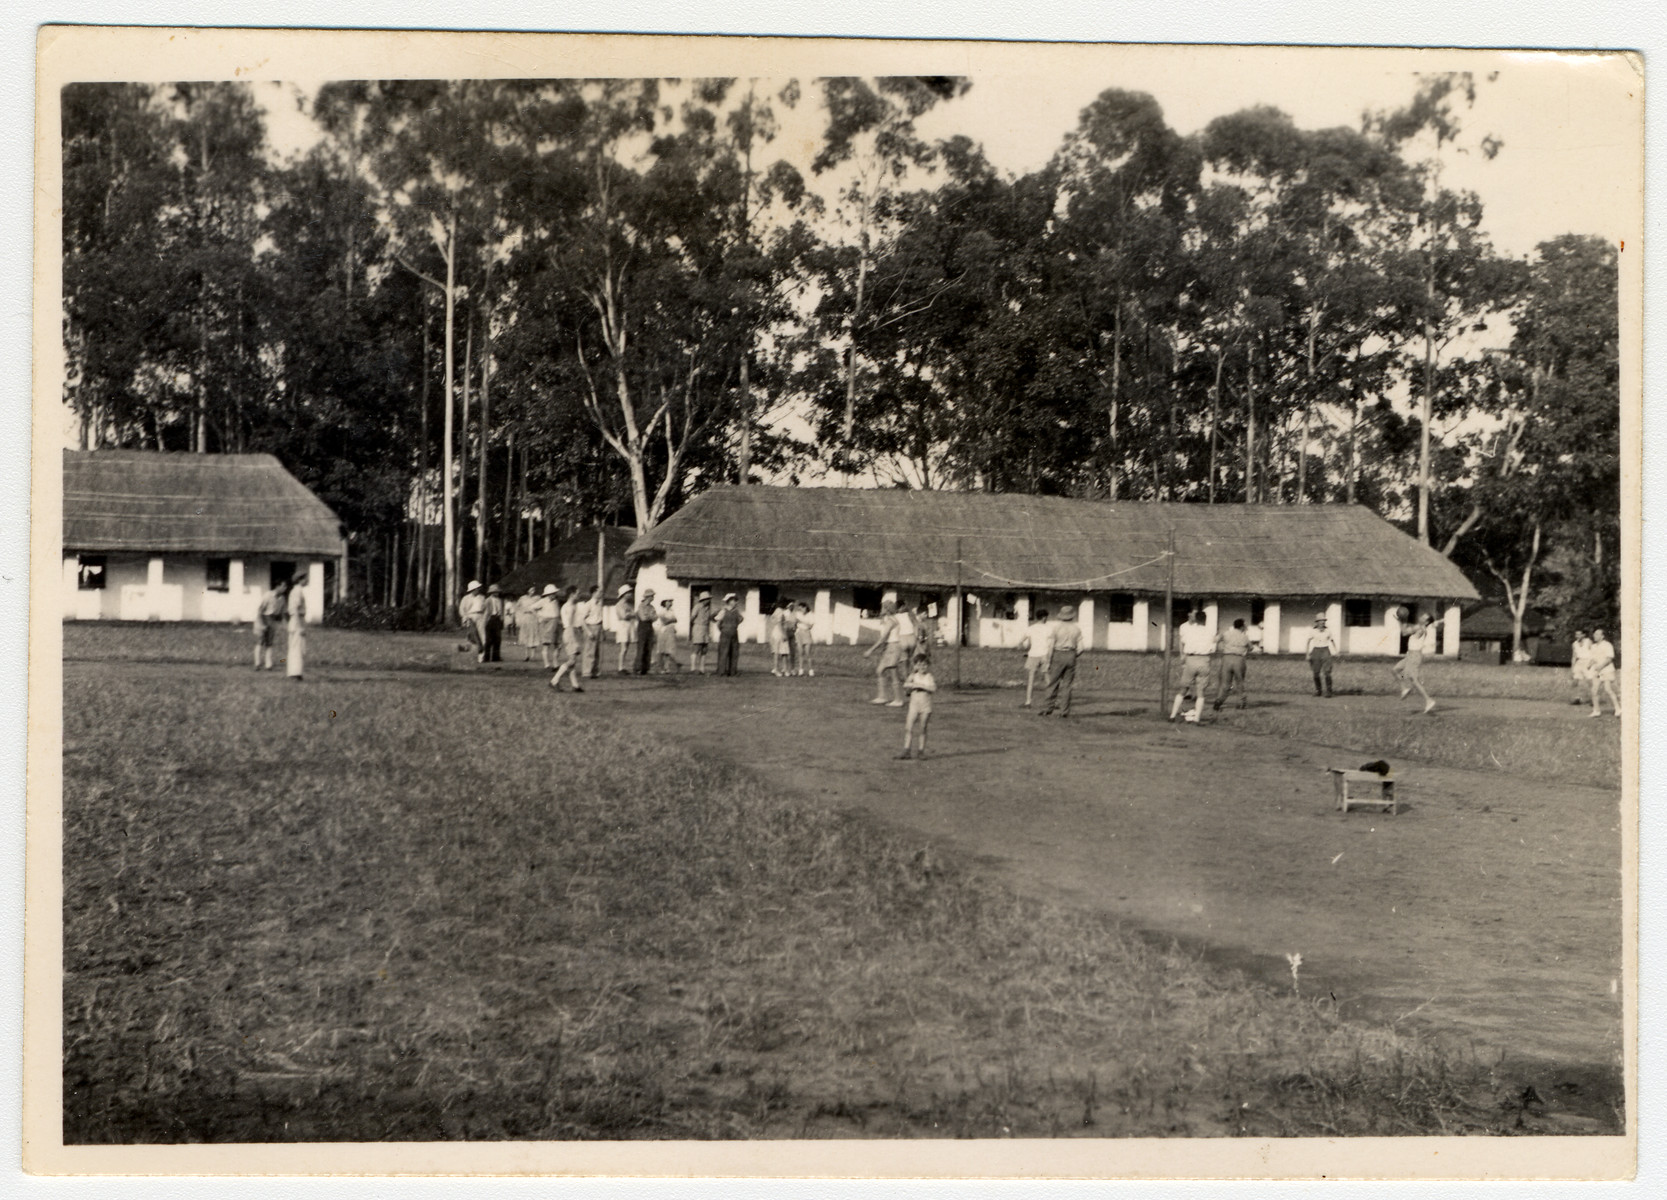 Internees play a sport on a grassy field in the internment camp for enemy aliens in Nyasaland.